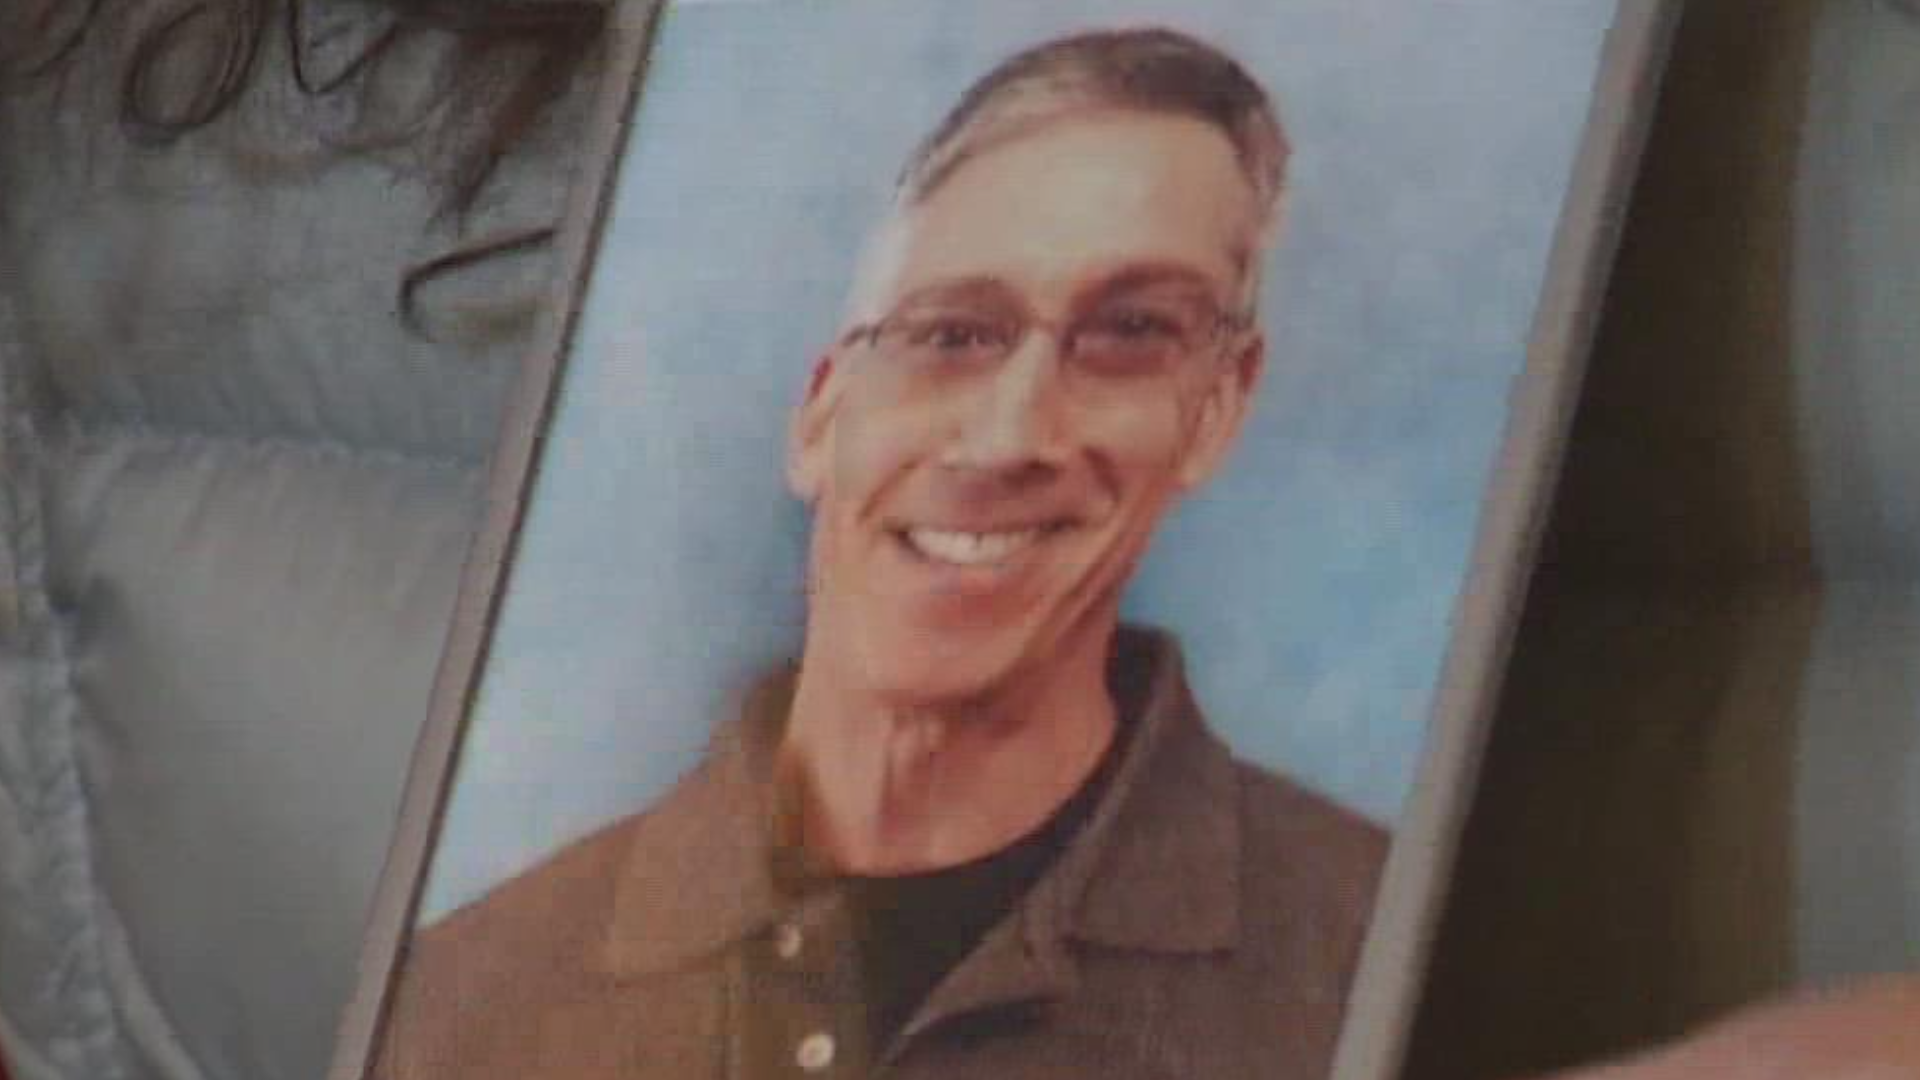 Robert Mason was killed in July while biking home from his job in West Seattle.